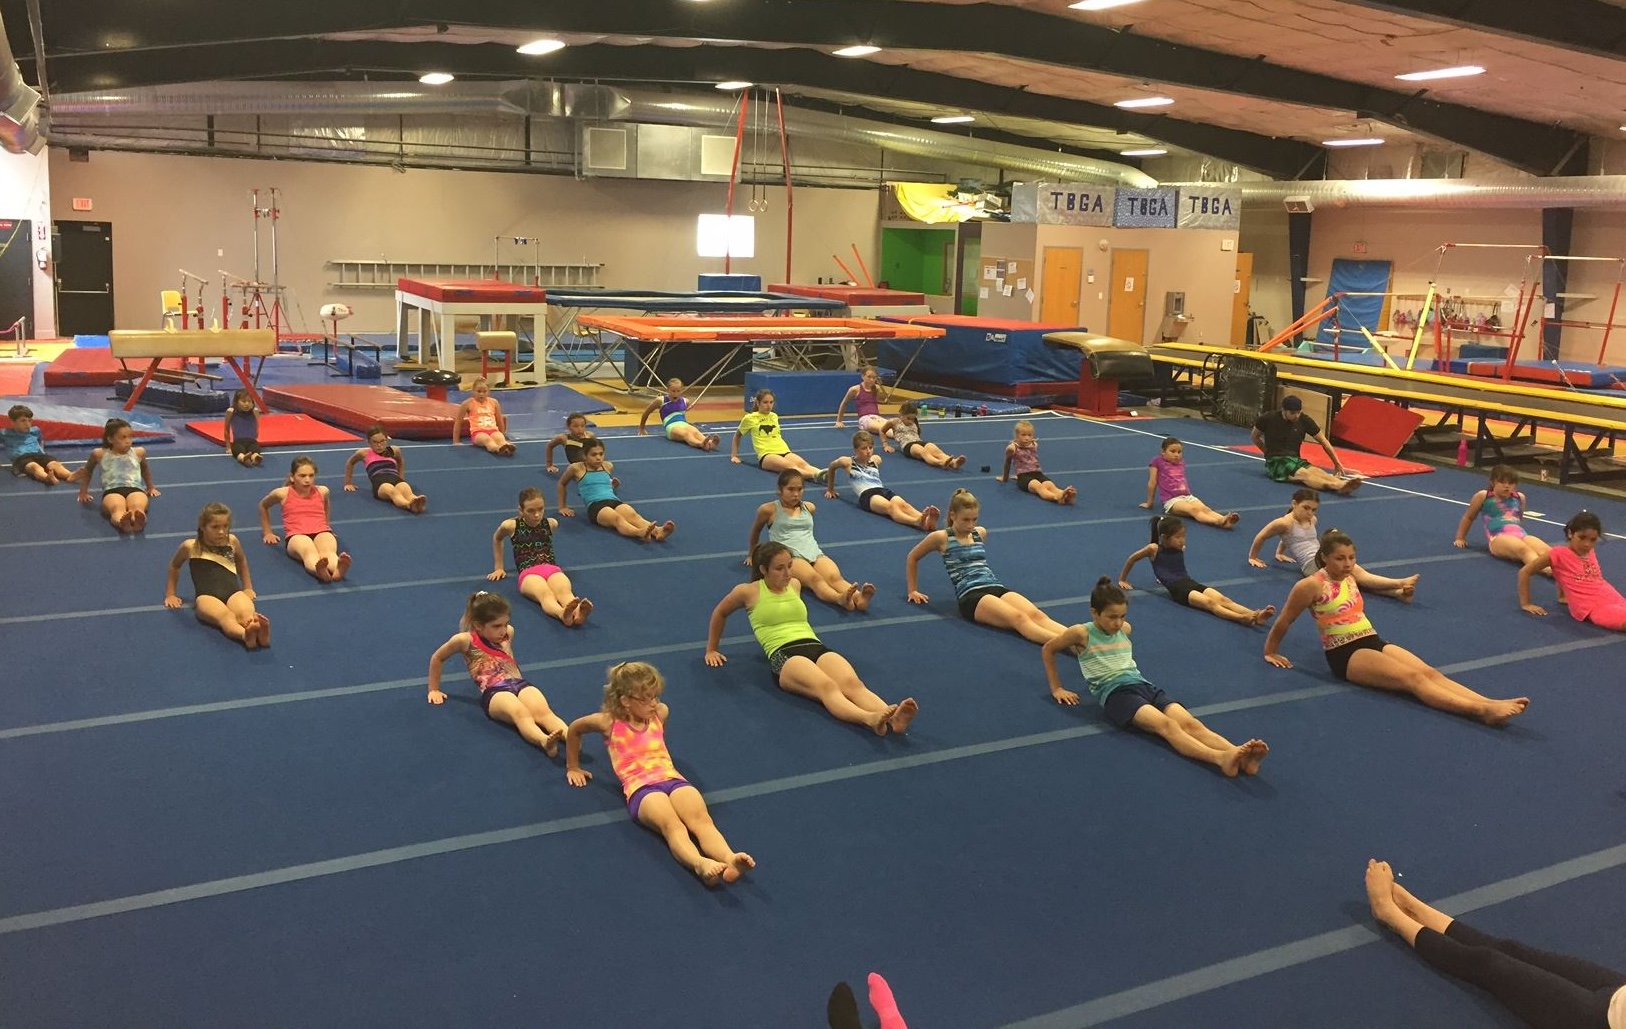 a high shot of several rows of kids doing synchronized warm-up stretches with their coaches in a gym filled with gymnastics mats and equipment.